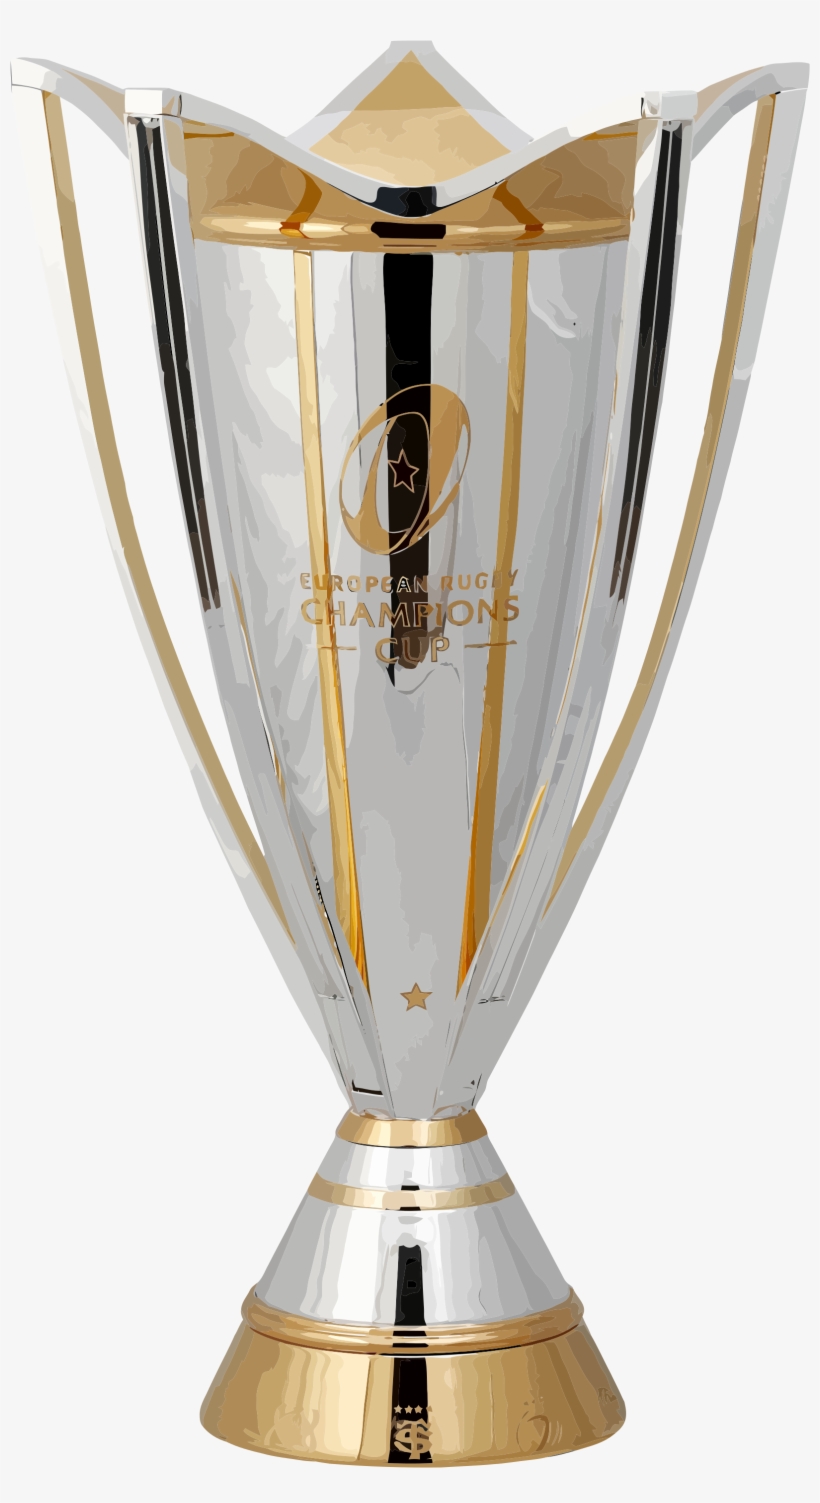 Champions League Trophy Png - European Rugby Champions Cup Trophy, transparent png #307668